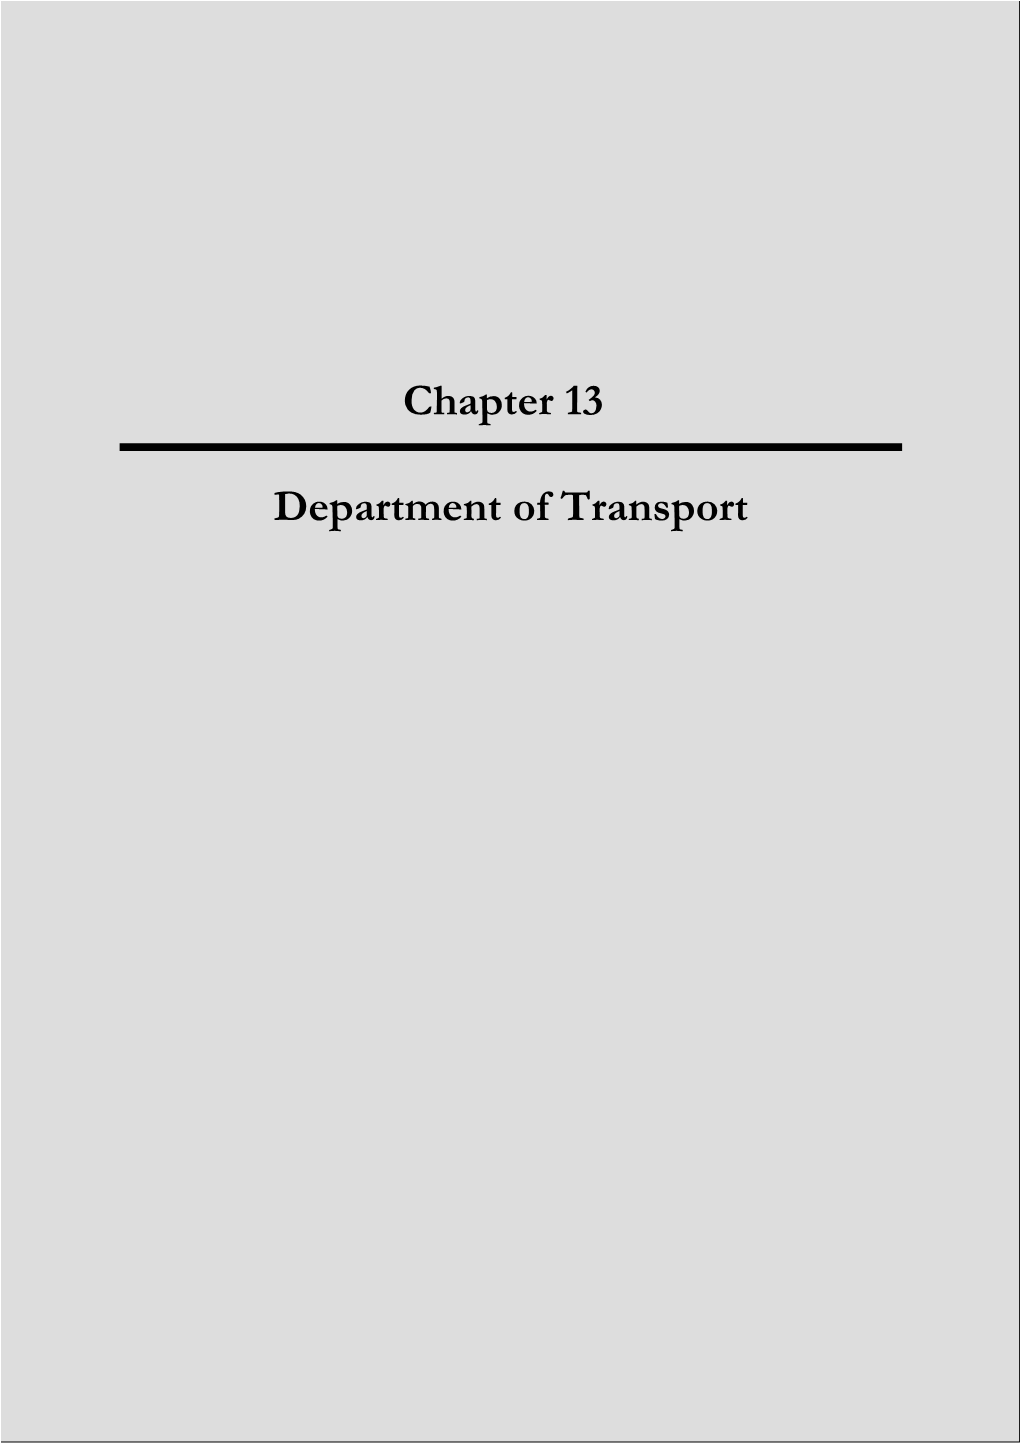 Chapter 13 Department of Transport